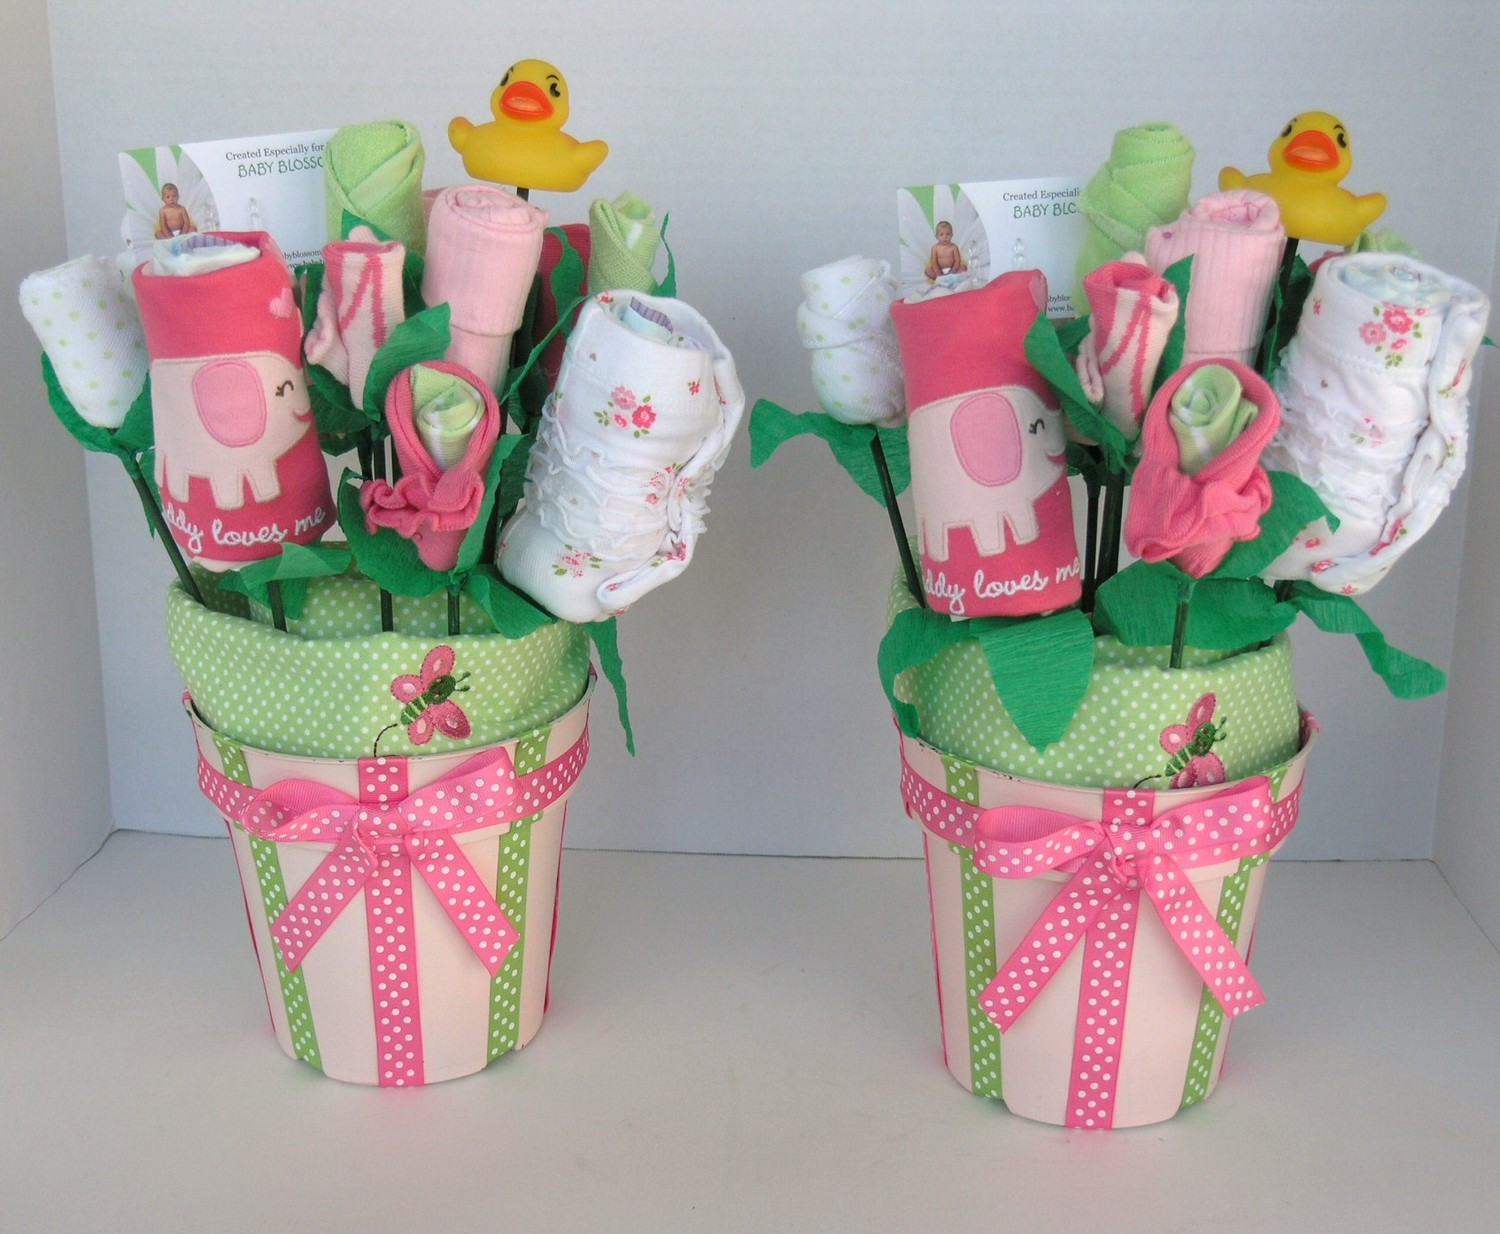 DIY Baby Gifts Ideas
 Five Best DIY Baby Gifting Ideas for The Little Special